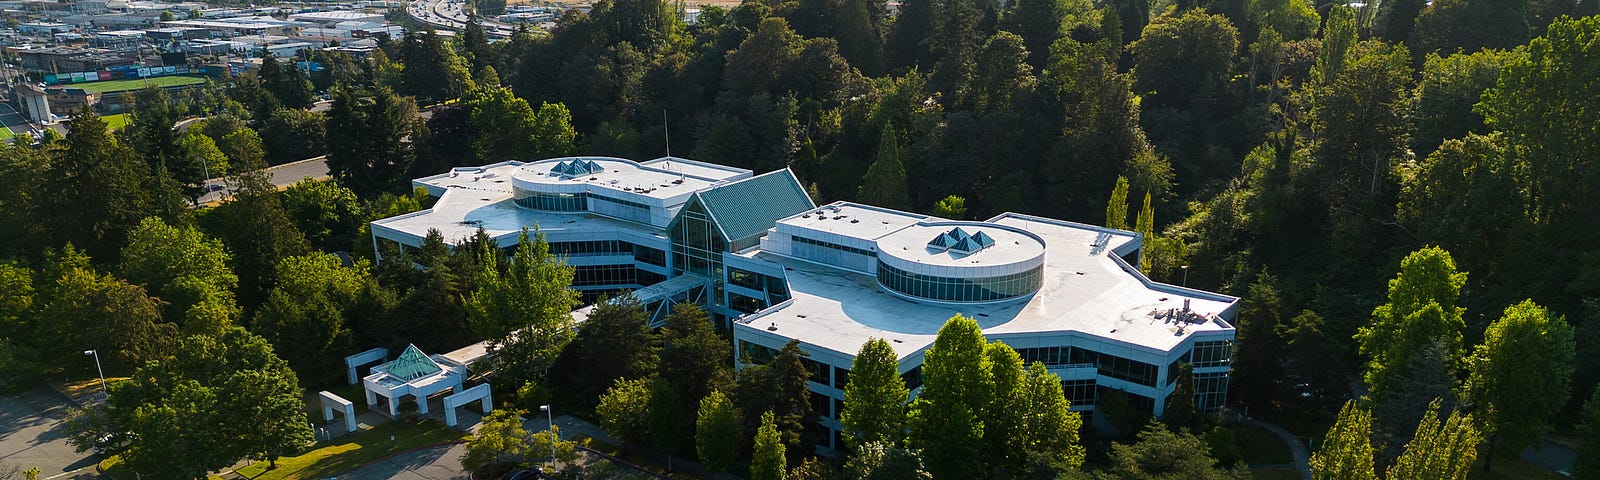 Aerial view of 988 call center in Everett, Washington